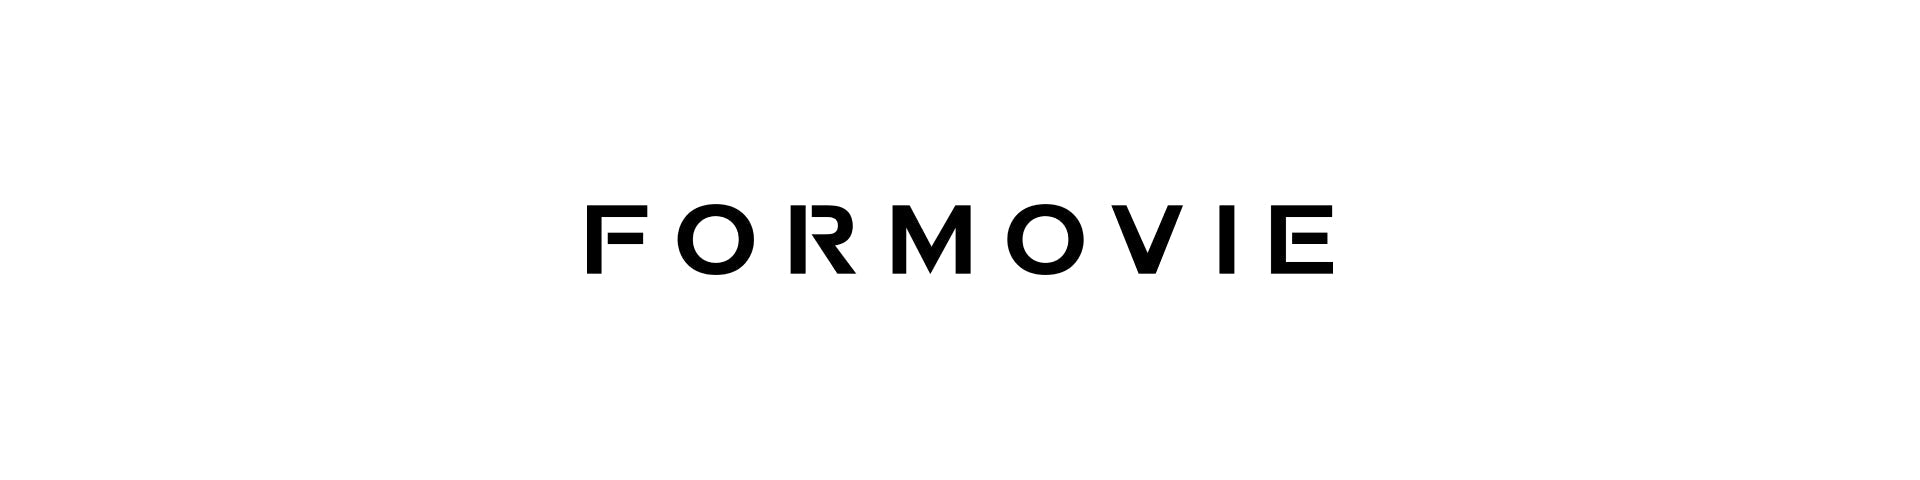 Formovie Official Site  Cinema in your home - Formovie Global